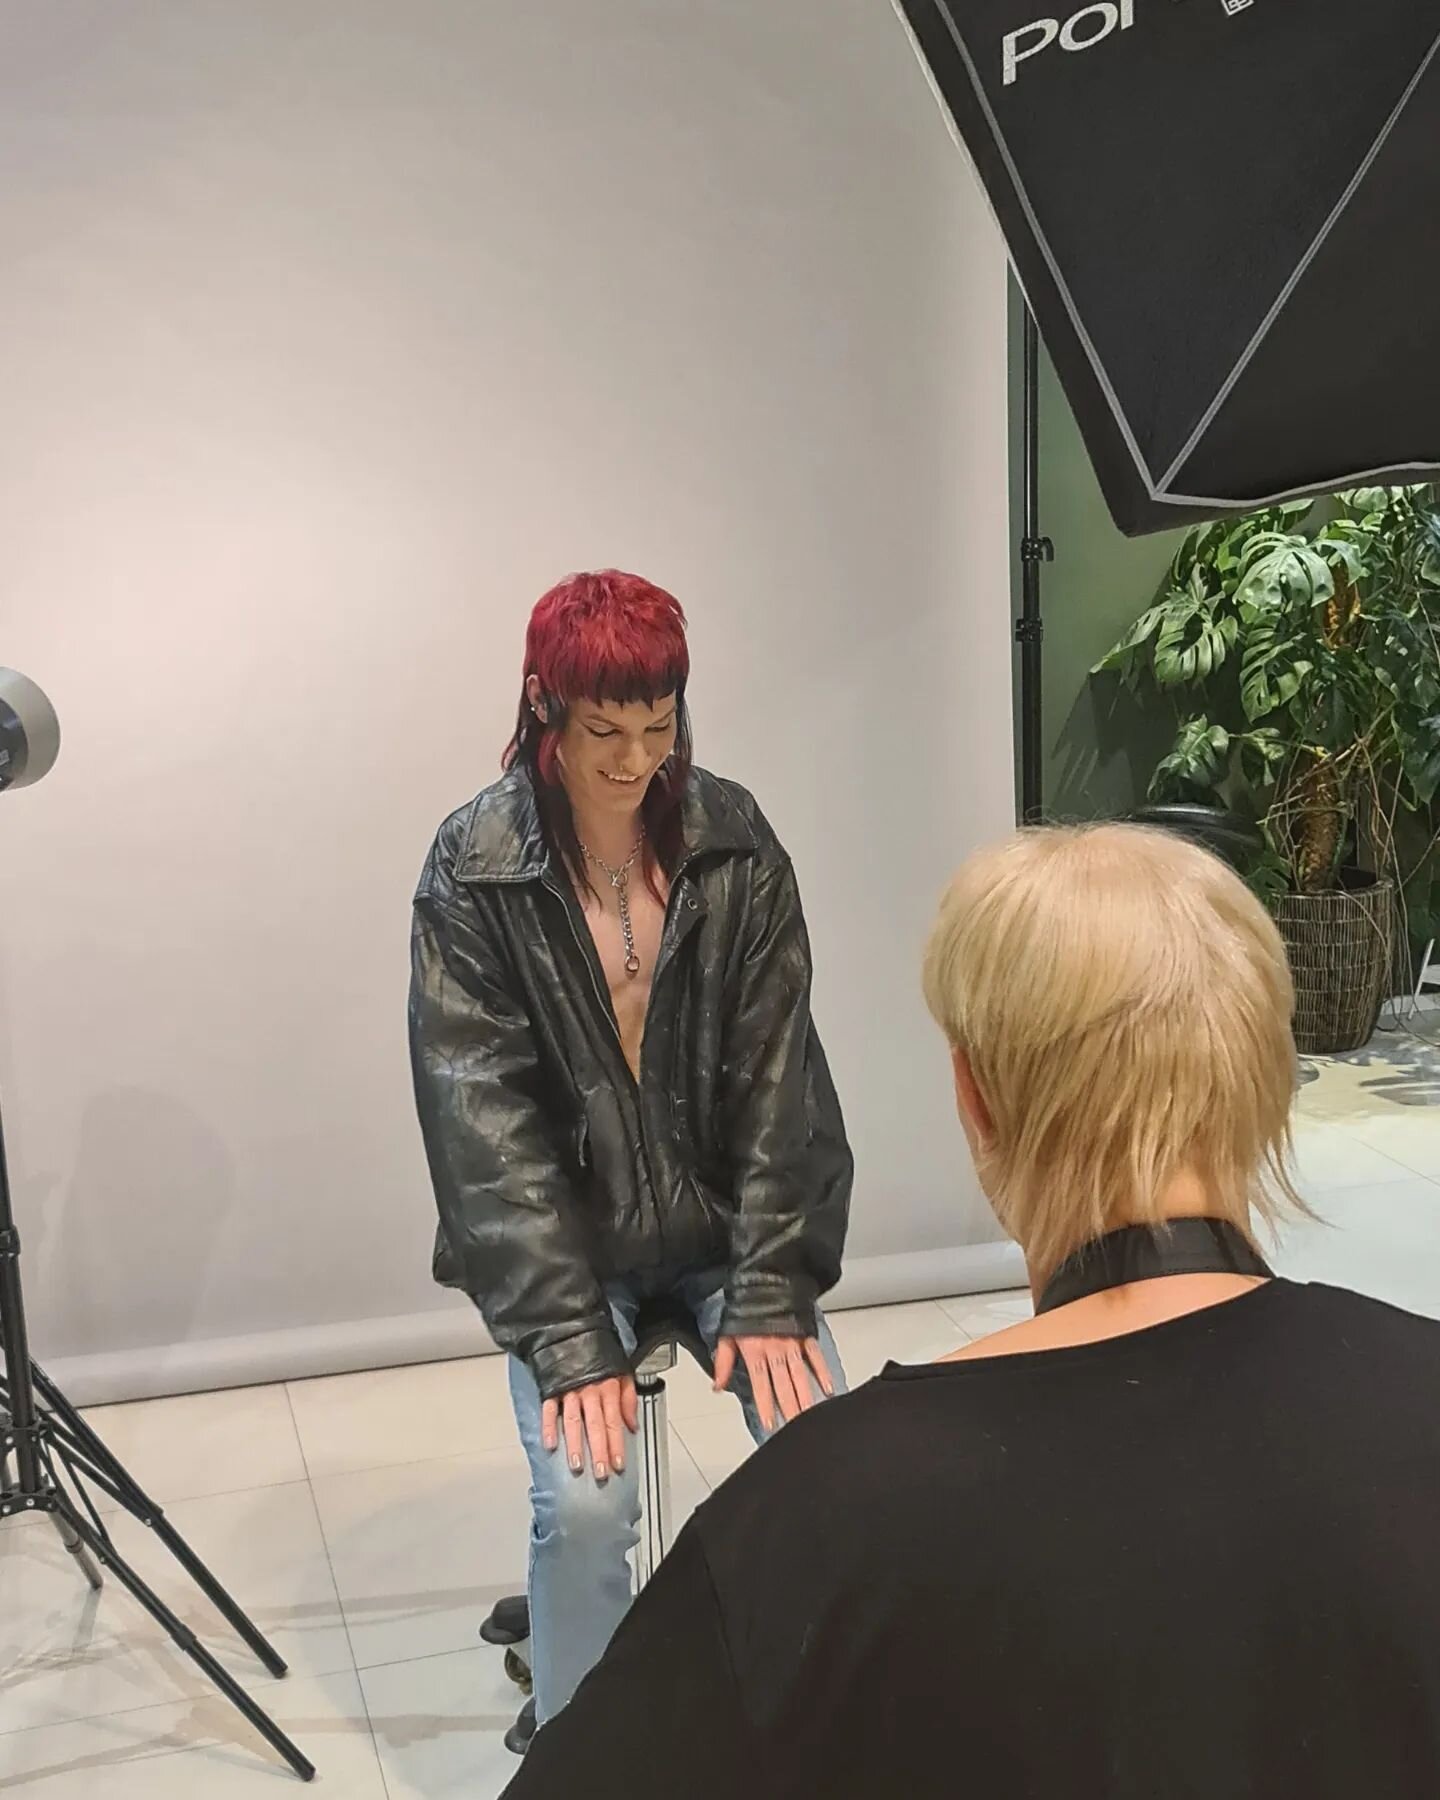 Some BTS 
☆
IIf you are the smartest person in the room, you are in the wrong room
☆
@harriakerberg @harriakerbergphotography @alexanderhakuli @wellaeducation_suomi
@wellaeducation_suomi
☆ 
#hairartist #awardwinner #awardwinninghairstylist #kampaamoh